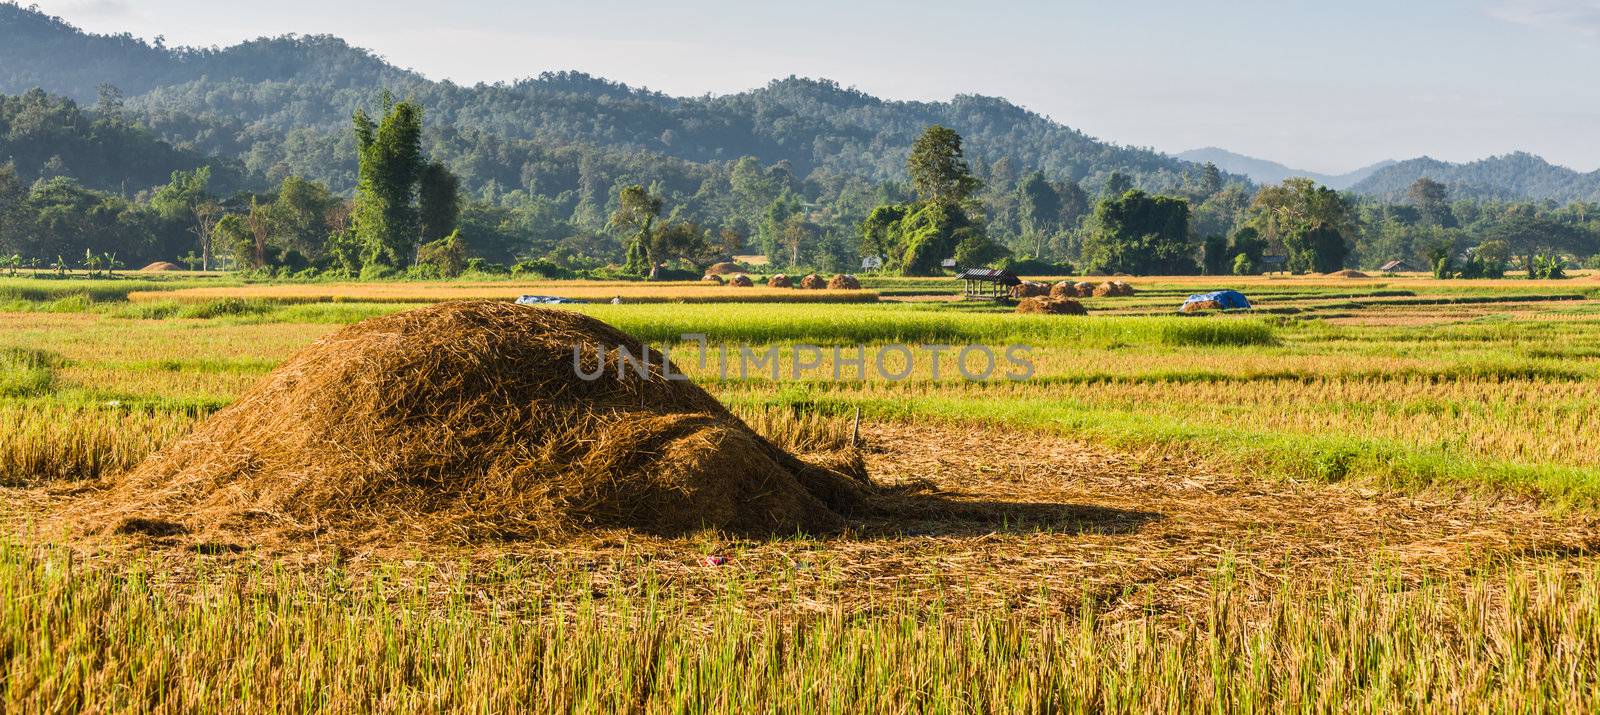 Pile of straw in rice field in thailand